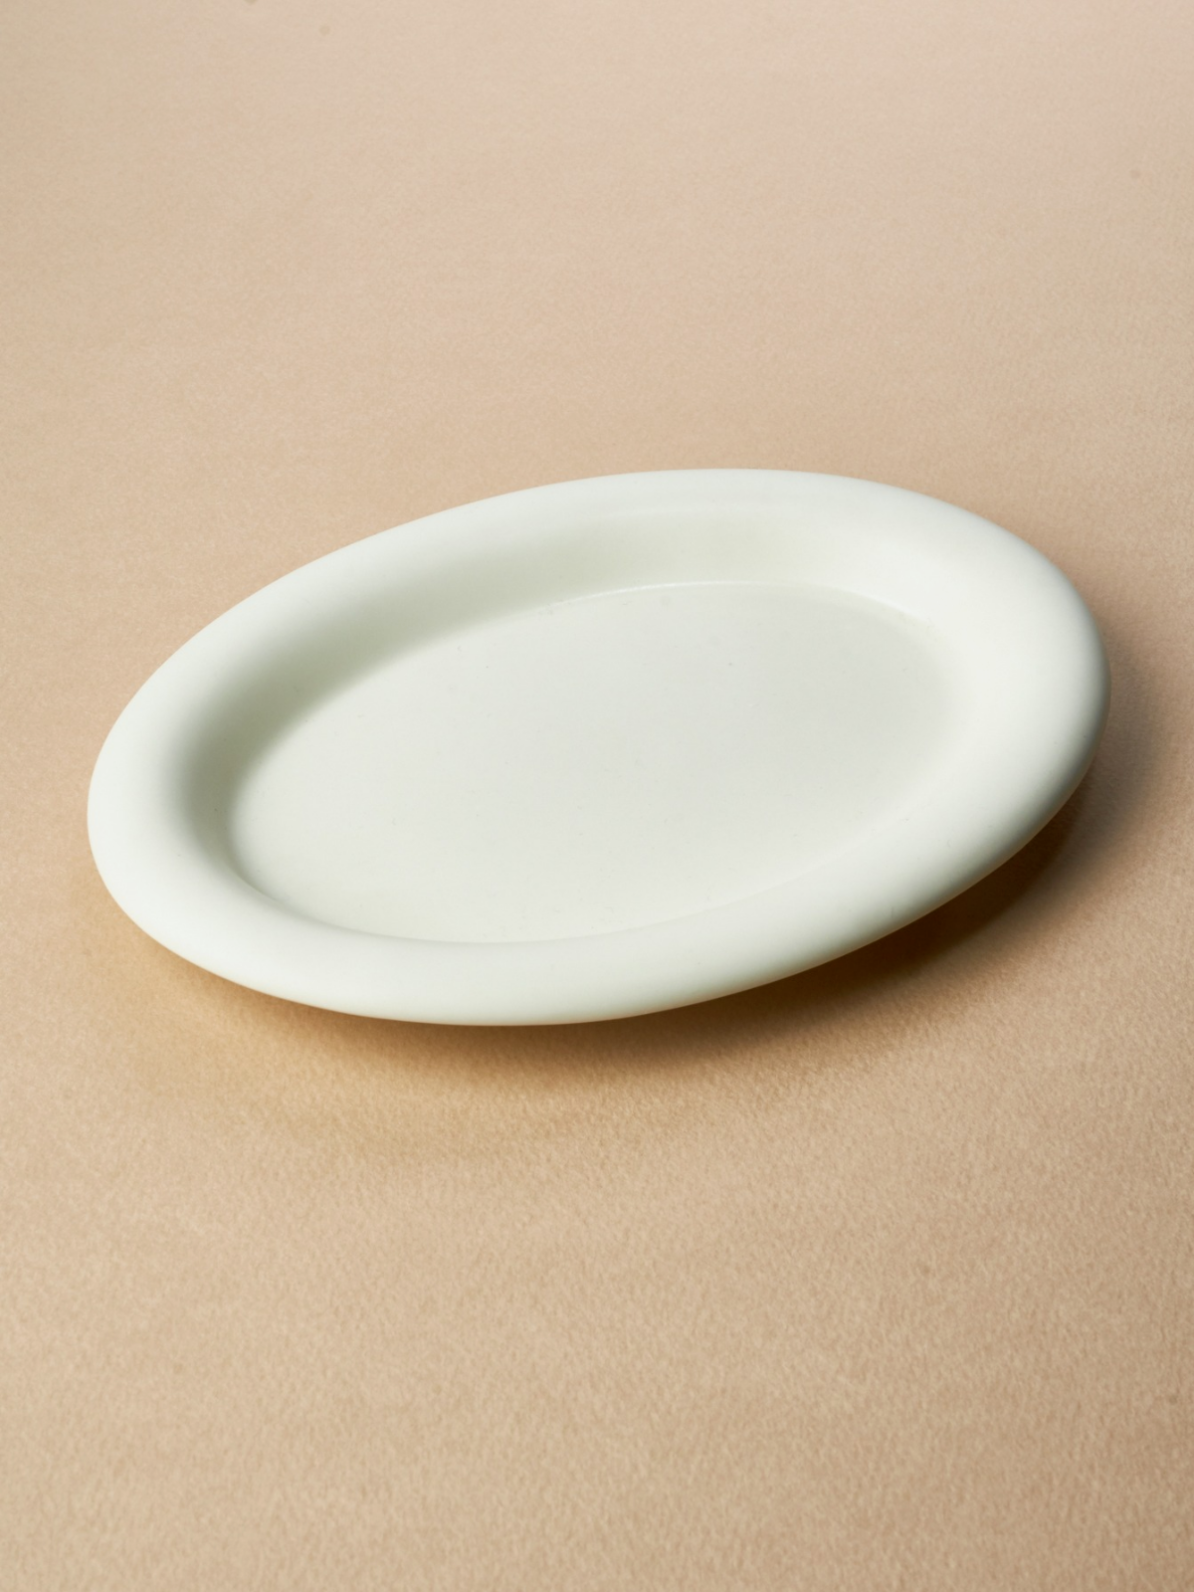 [Still Life] NATURAL PLATE IVORY M (CRAFTED BY ARTIST KIWON LIM)